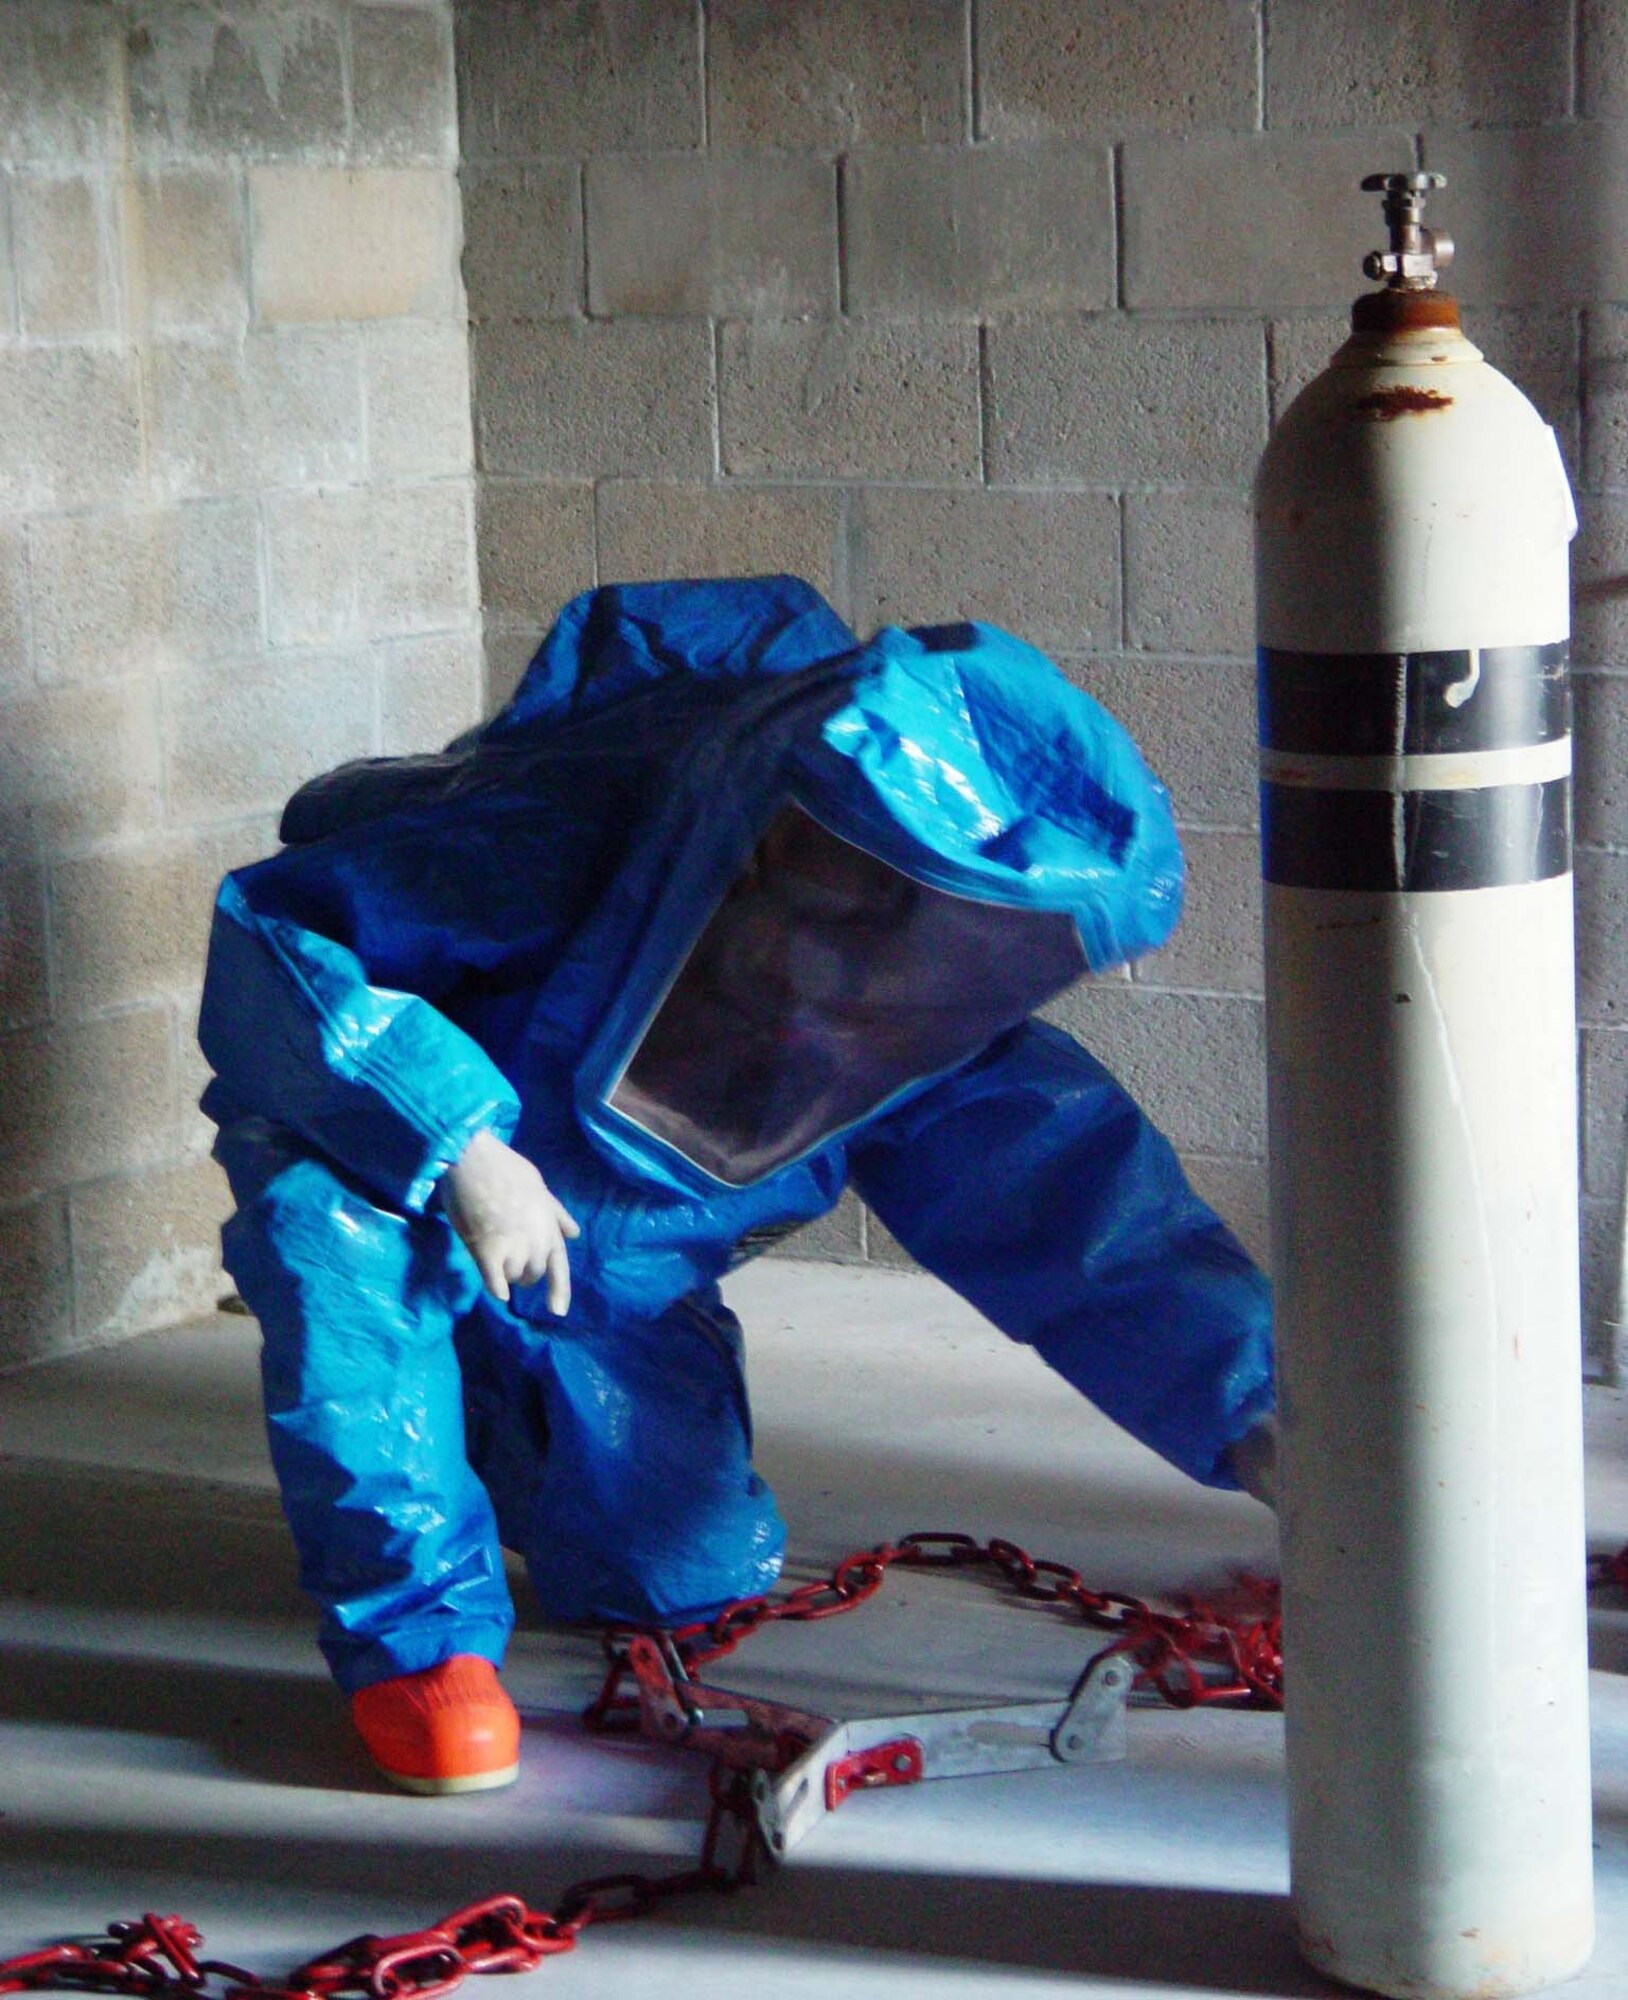 A firefighter from the 482nd Civil Engineering Squadron prepares to cap a simulated chlorine leak during hazardous materials training at Homestead Air Reserve Base, Fla. on June 9. Members of the base fire department train several times a year while wearing chemical and biological protective suits.  The firefighters had 20 minutes from the initial call to contain the leak.  (US Air Force photo by Lisa Macias)